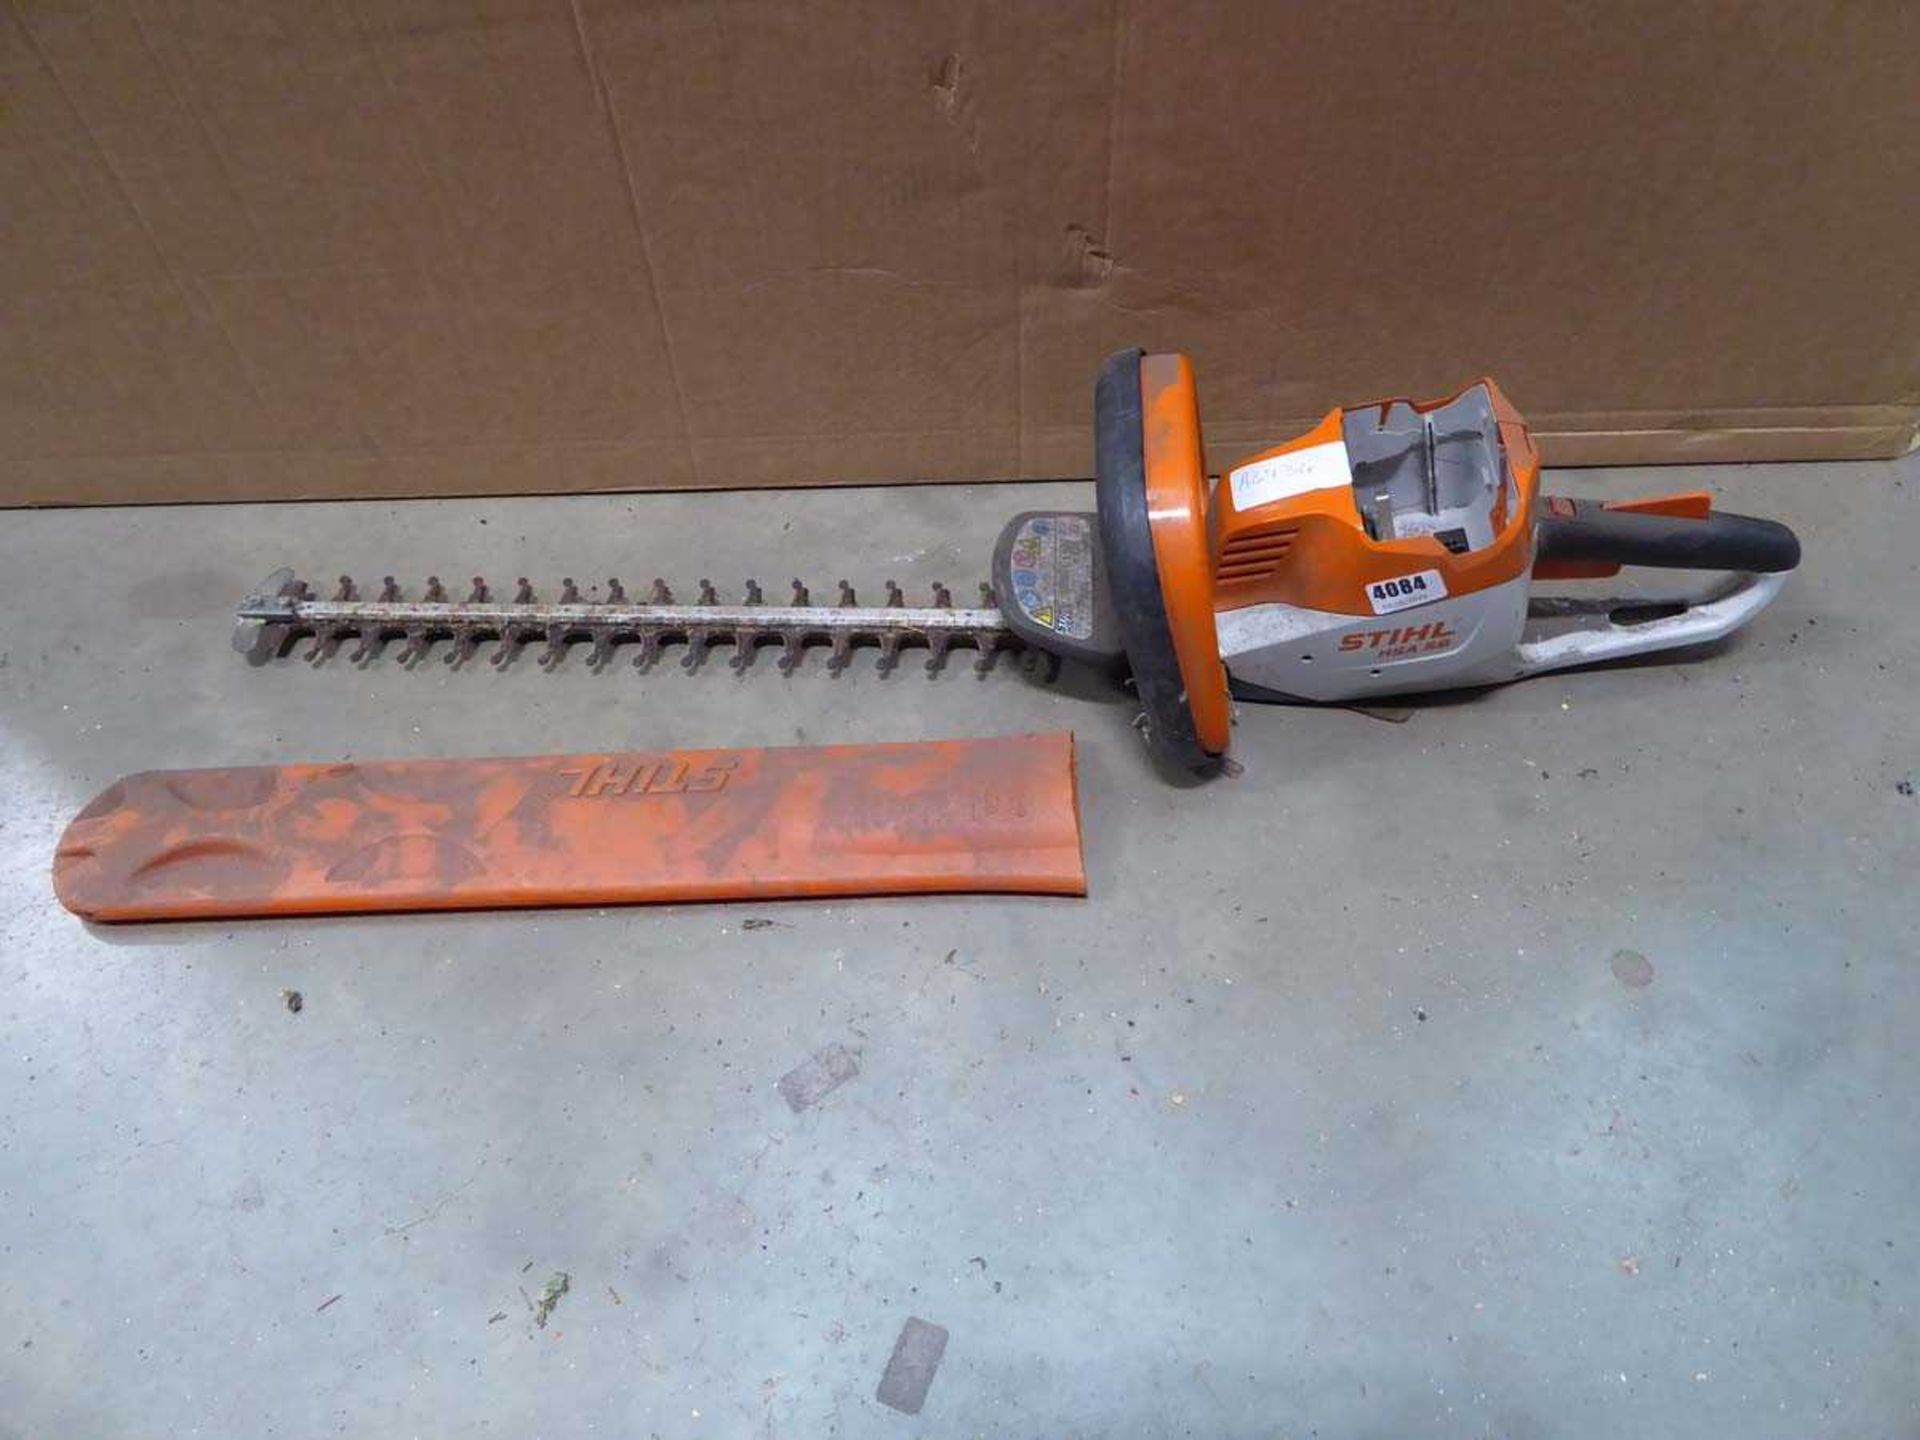 Stihl HSA 56 battery powered hedge cutter - no battery, no charger